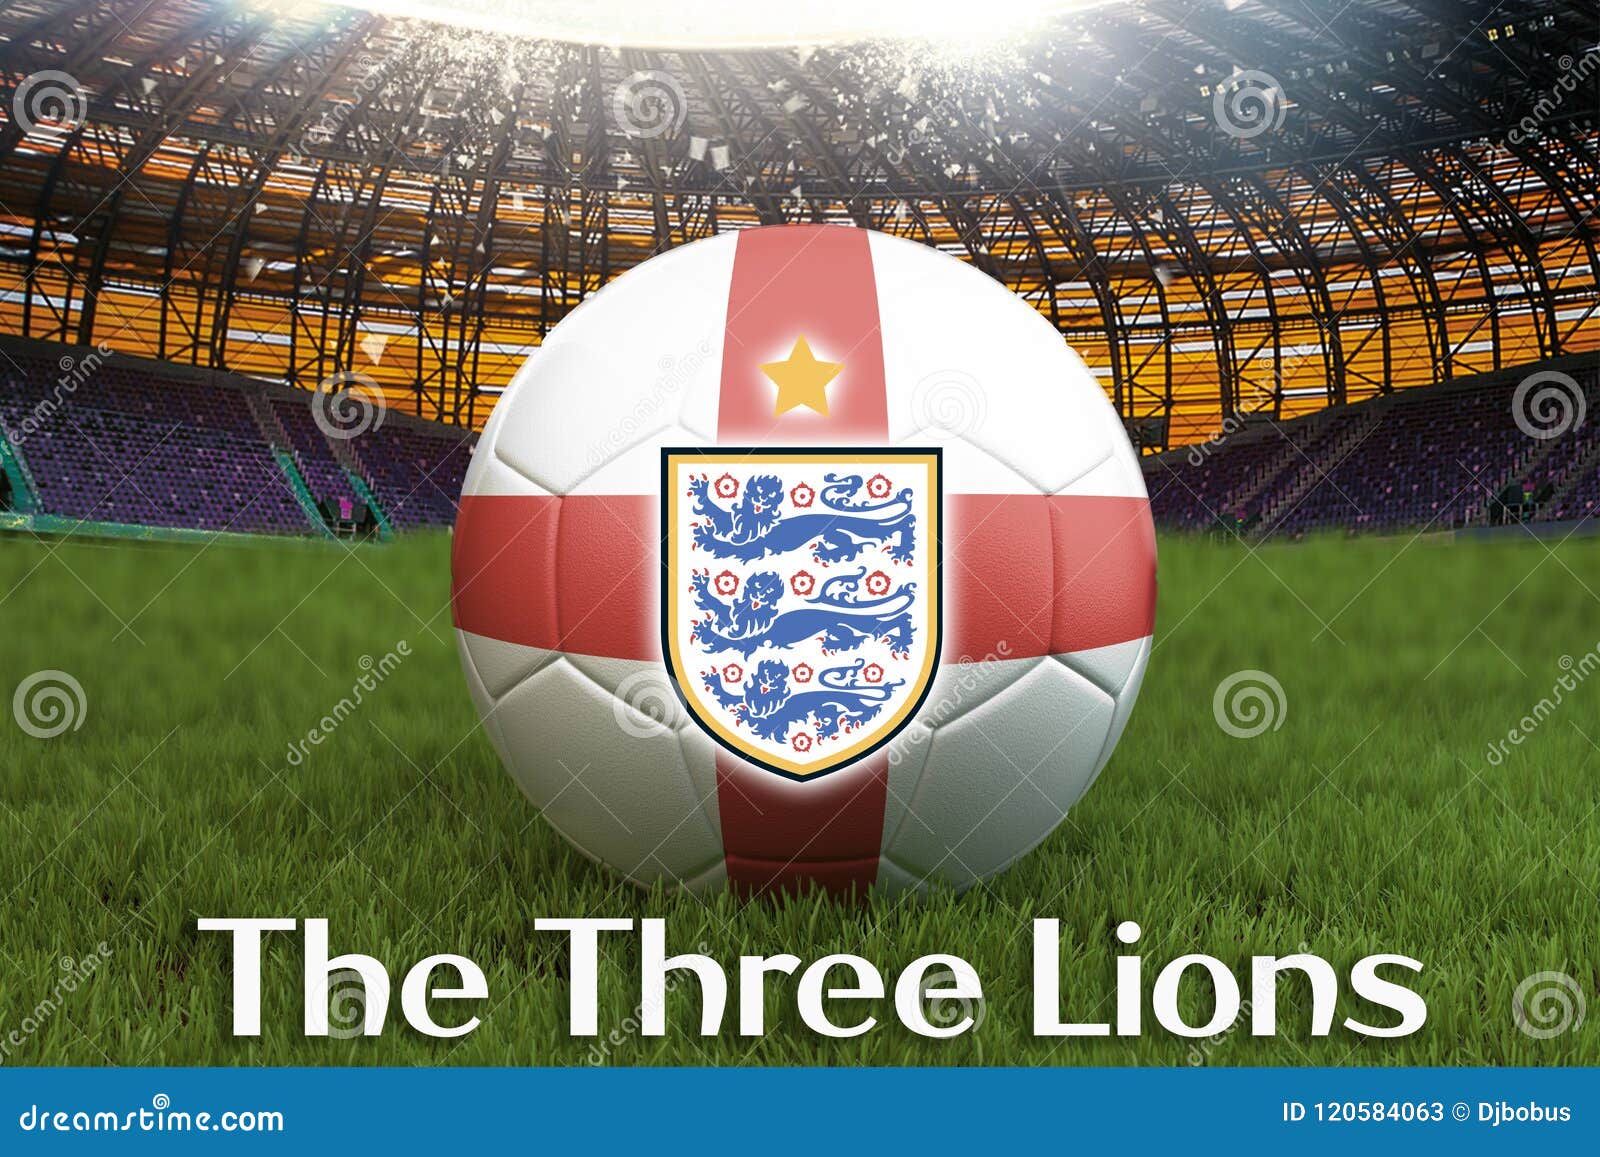 The Three Lions Text On England Football Team Ball On Big Stadium Background With England Team Logo Competition Concept England F Stock Illustration Illustration Of Goal Nation 120584063